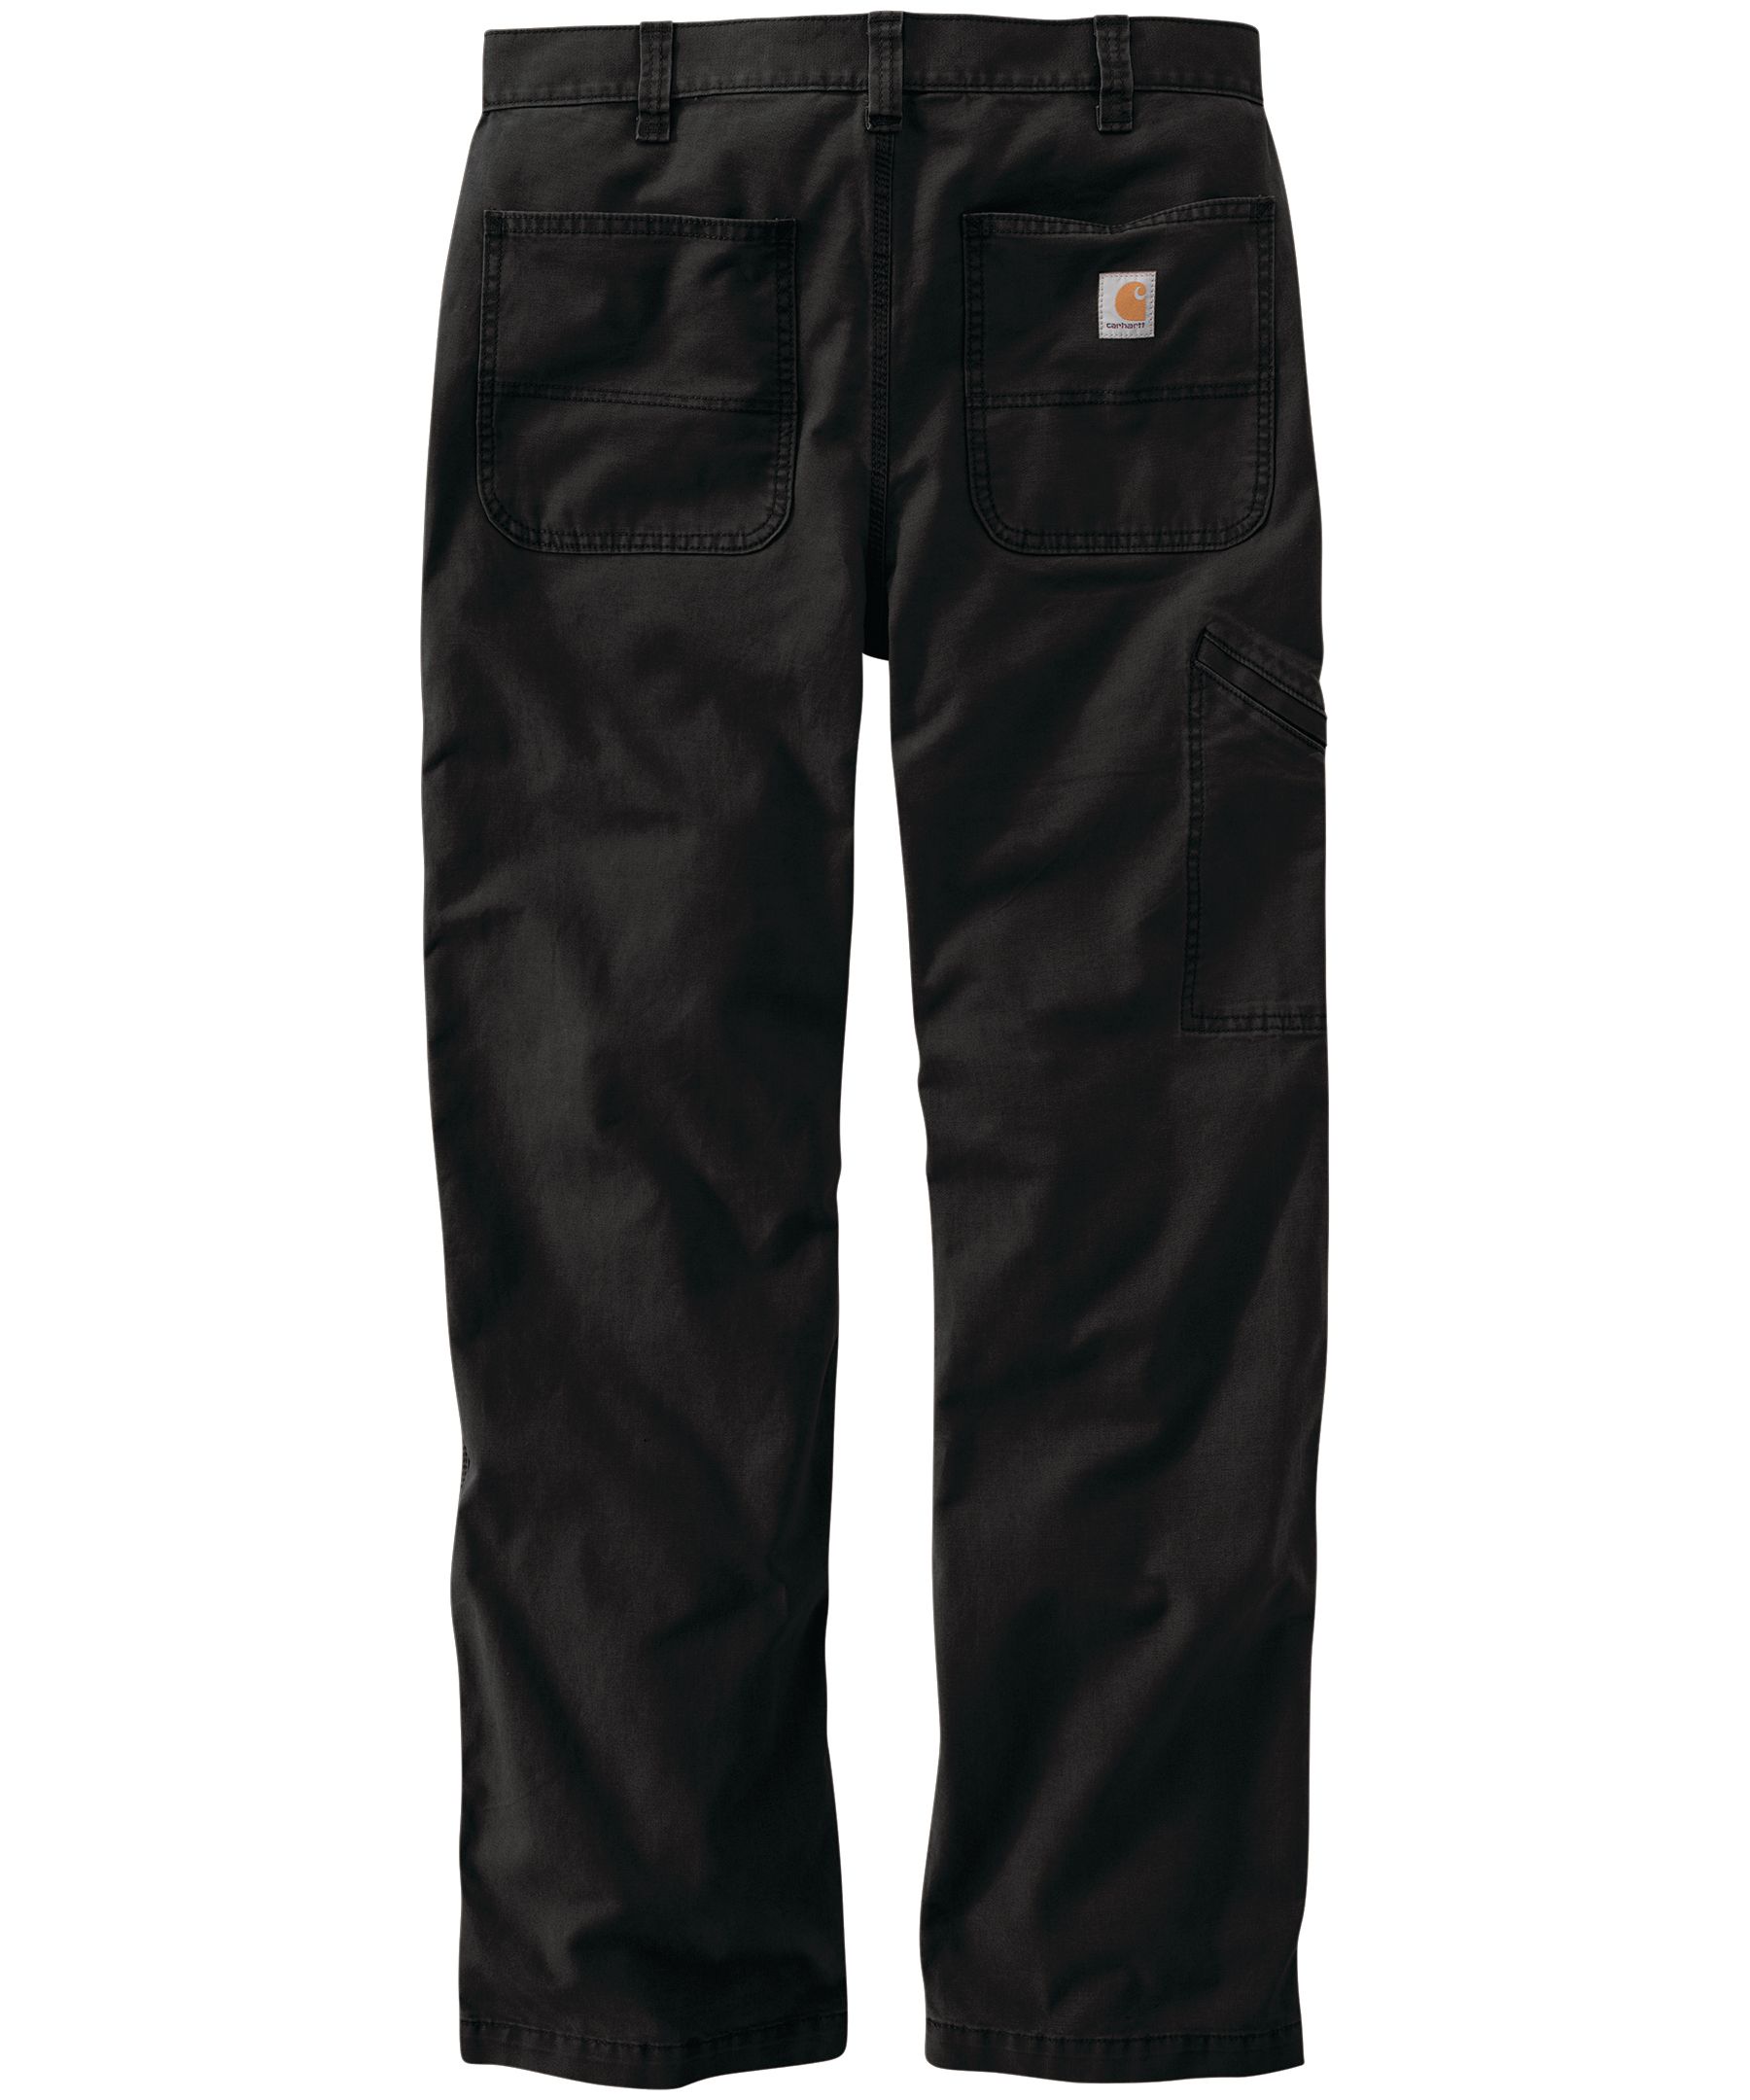 Women's Work Jean - Relaxed Fit - Rugged Flex®, Coming Soon